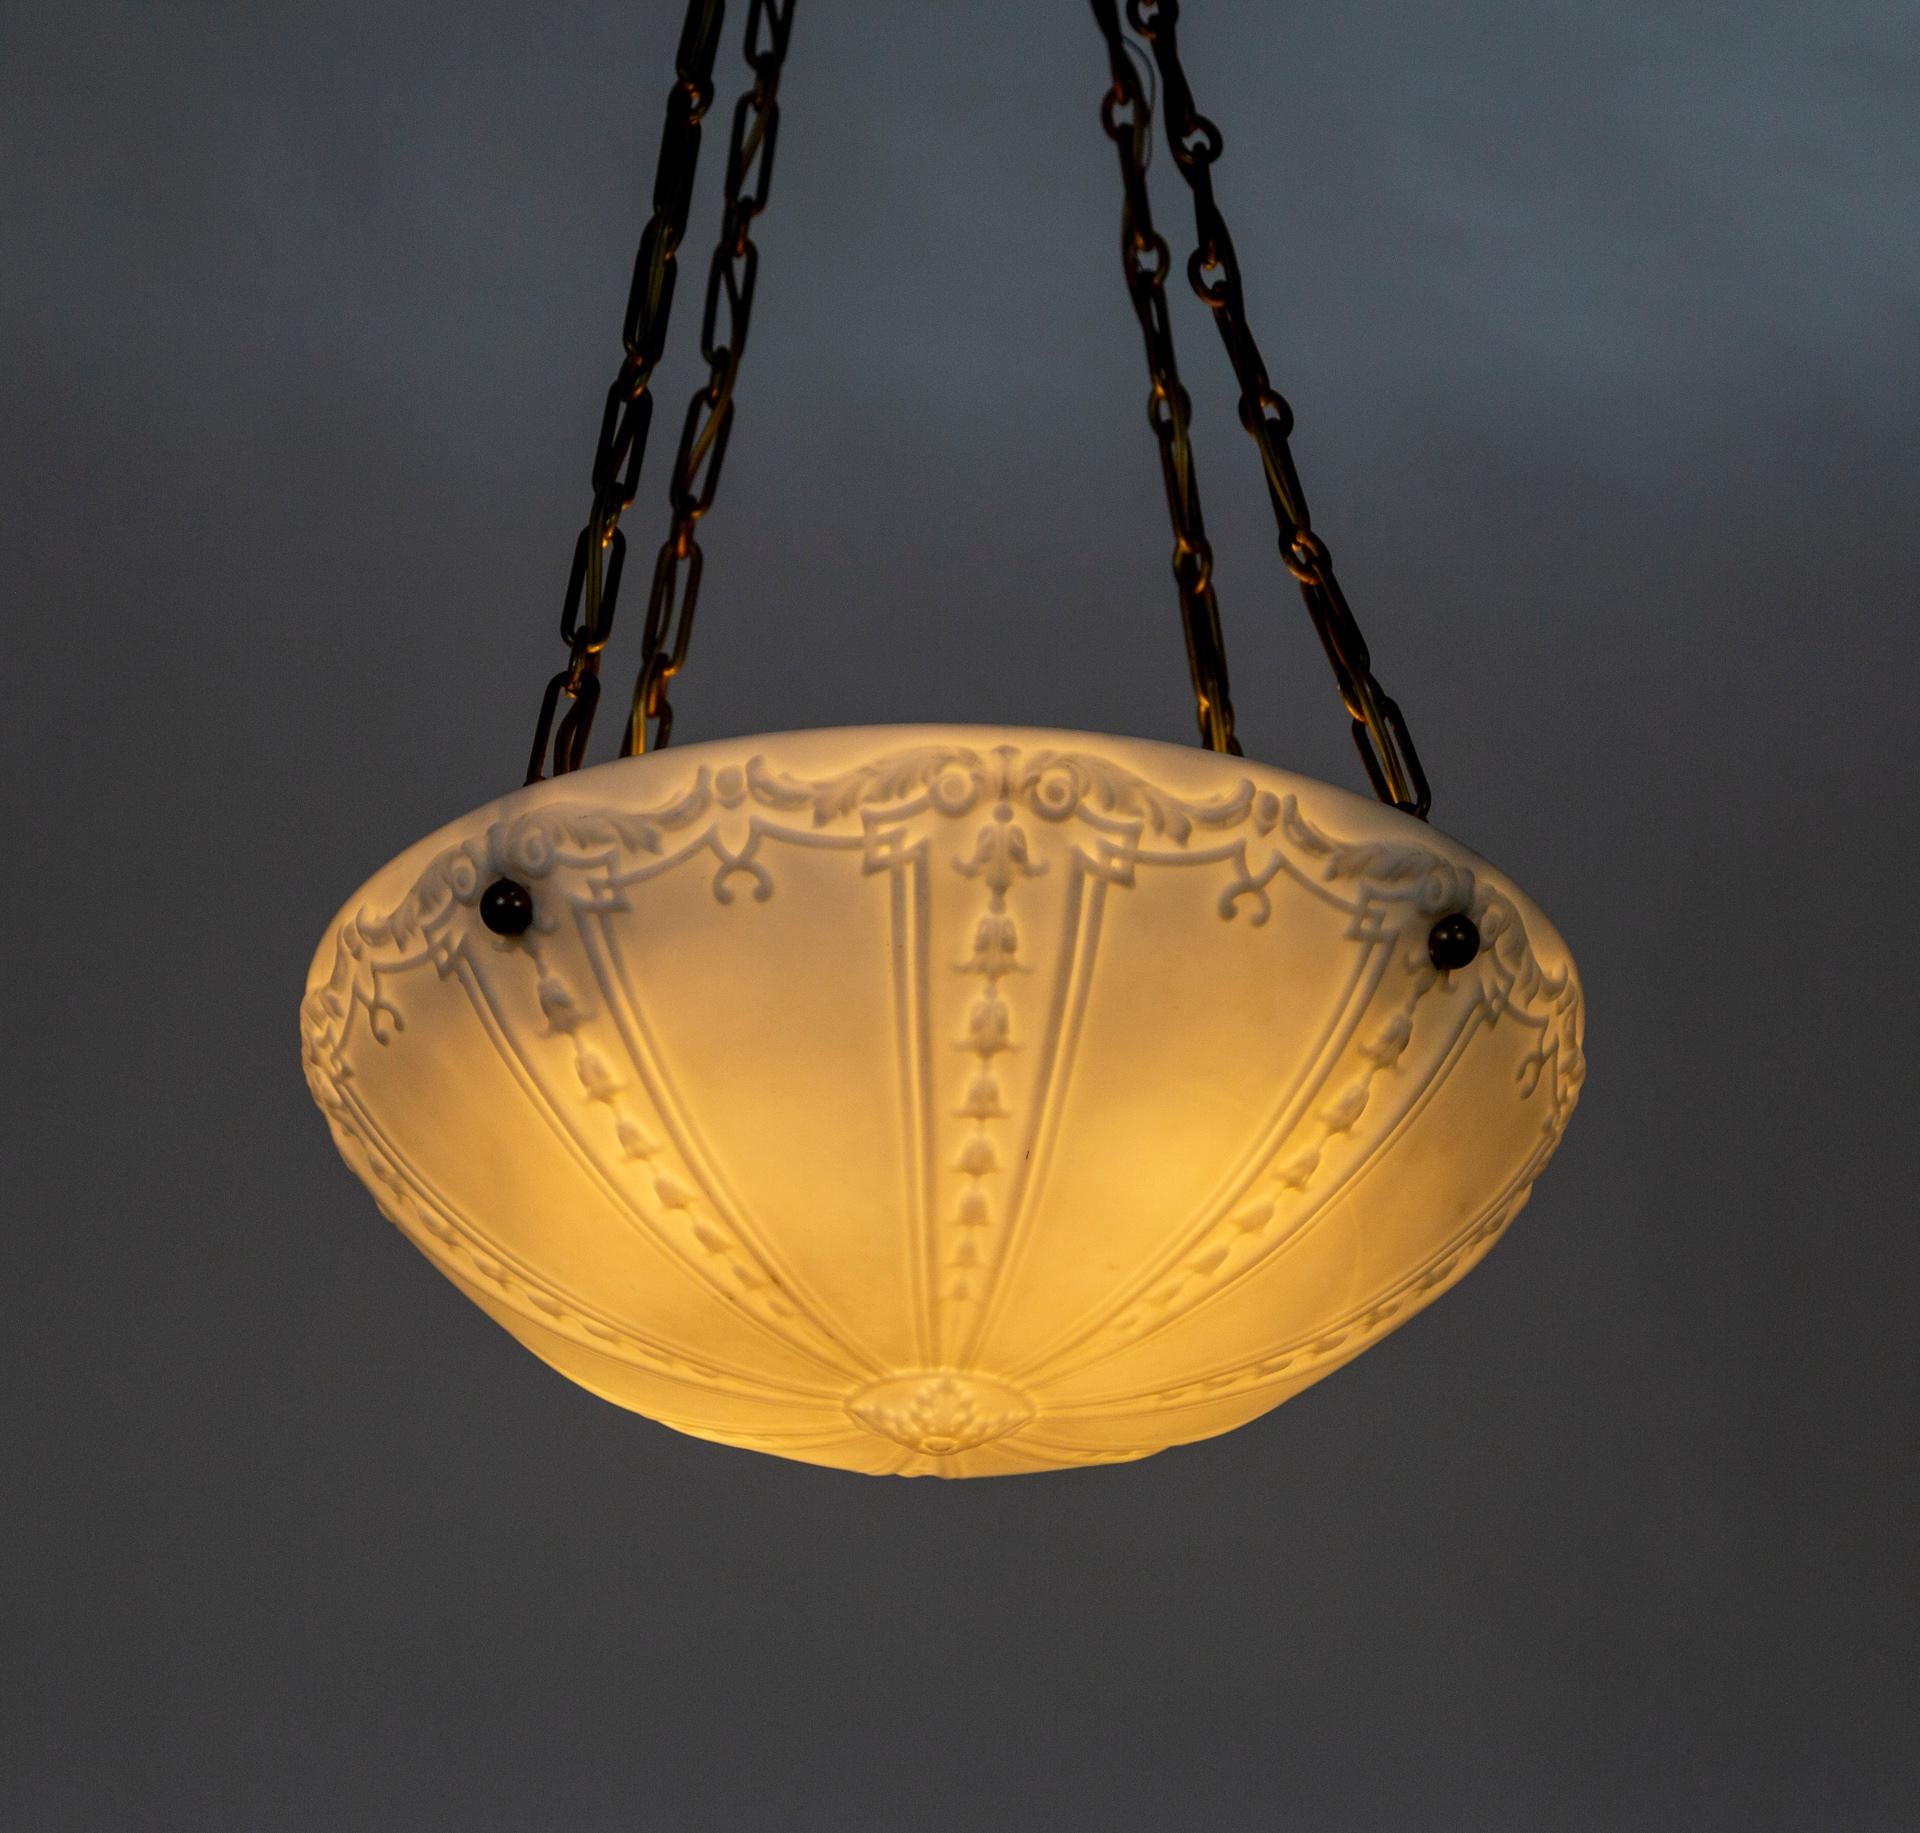 A pair of large, hanging, up-lights with white, glass, bowl shades from the early 20th century. The imprinted glass is detailed with acanthus leaf garlands and radial bell flowers. They hang from four long, decorative chains and etched brass